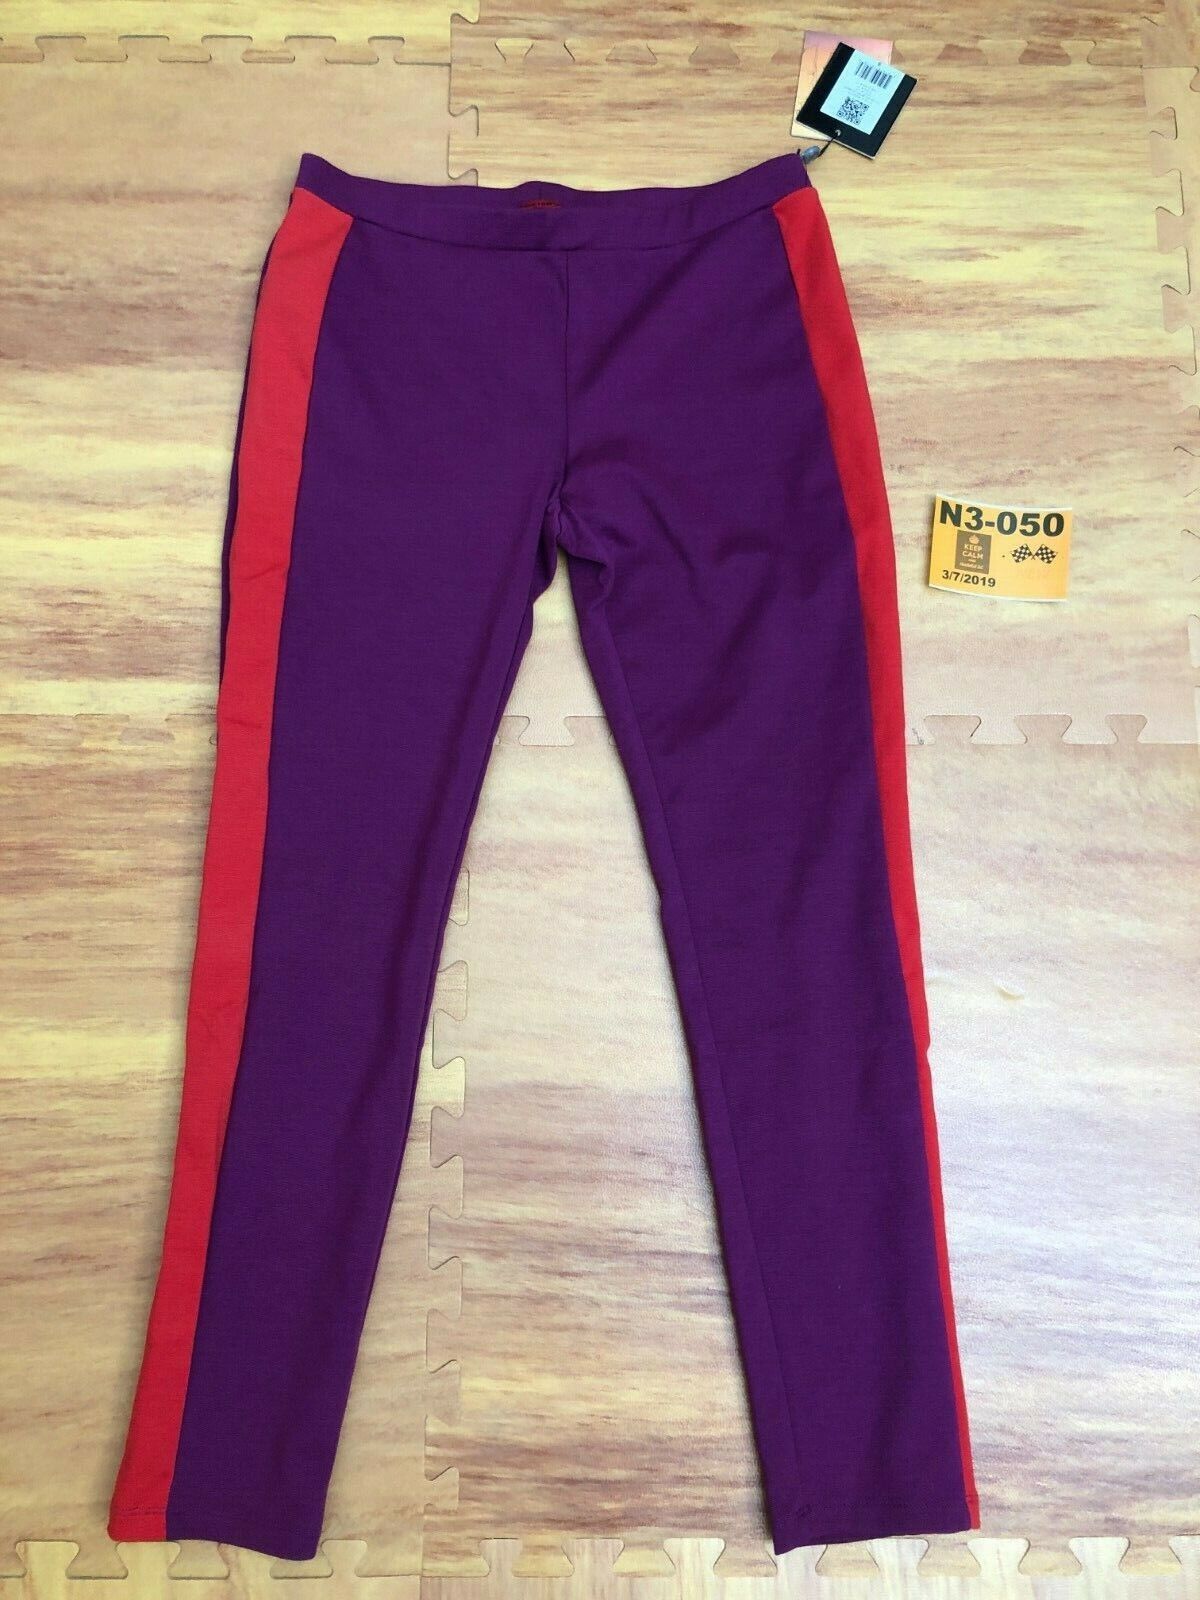 New NARCISO RODRIGUEZ Pants Legging Design Nation Pink Purple Red Stripe Small S